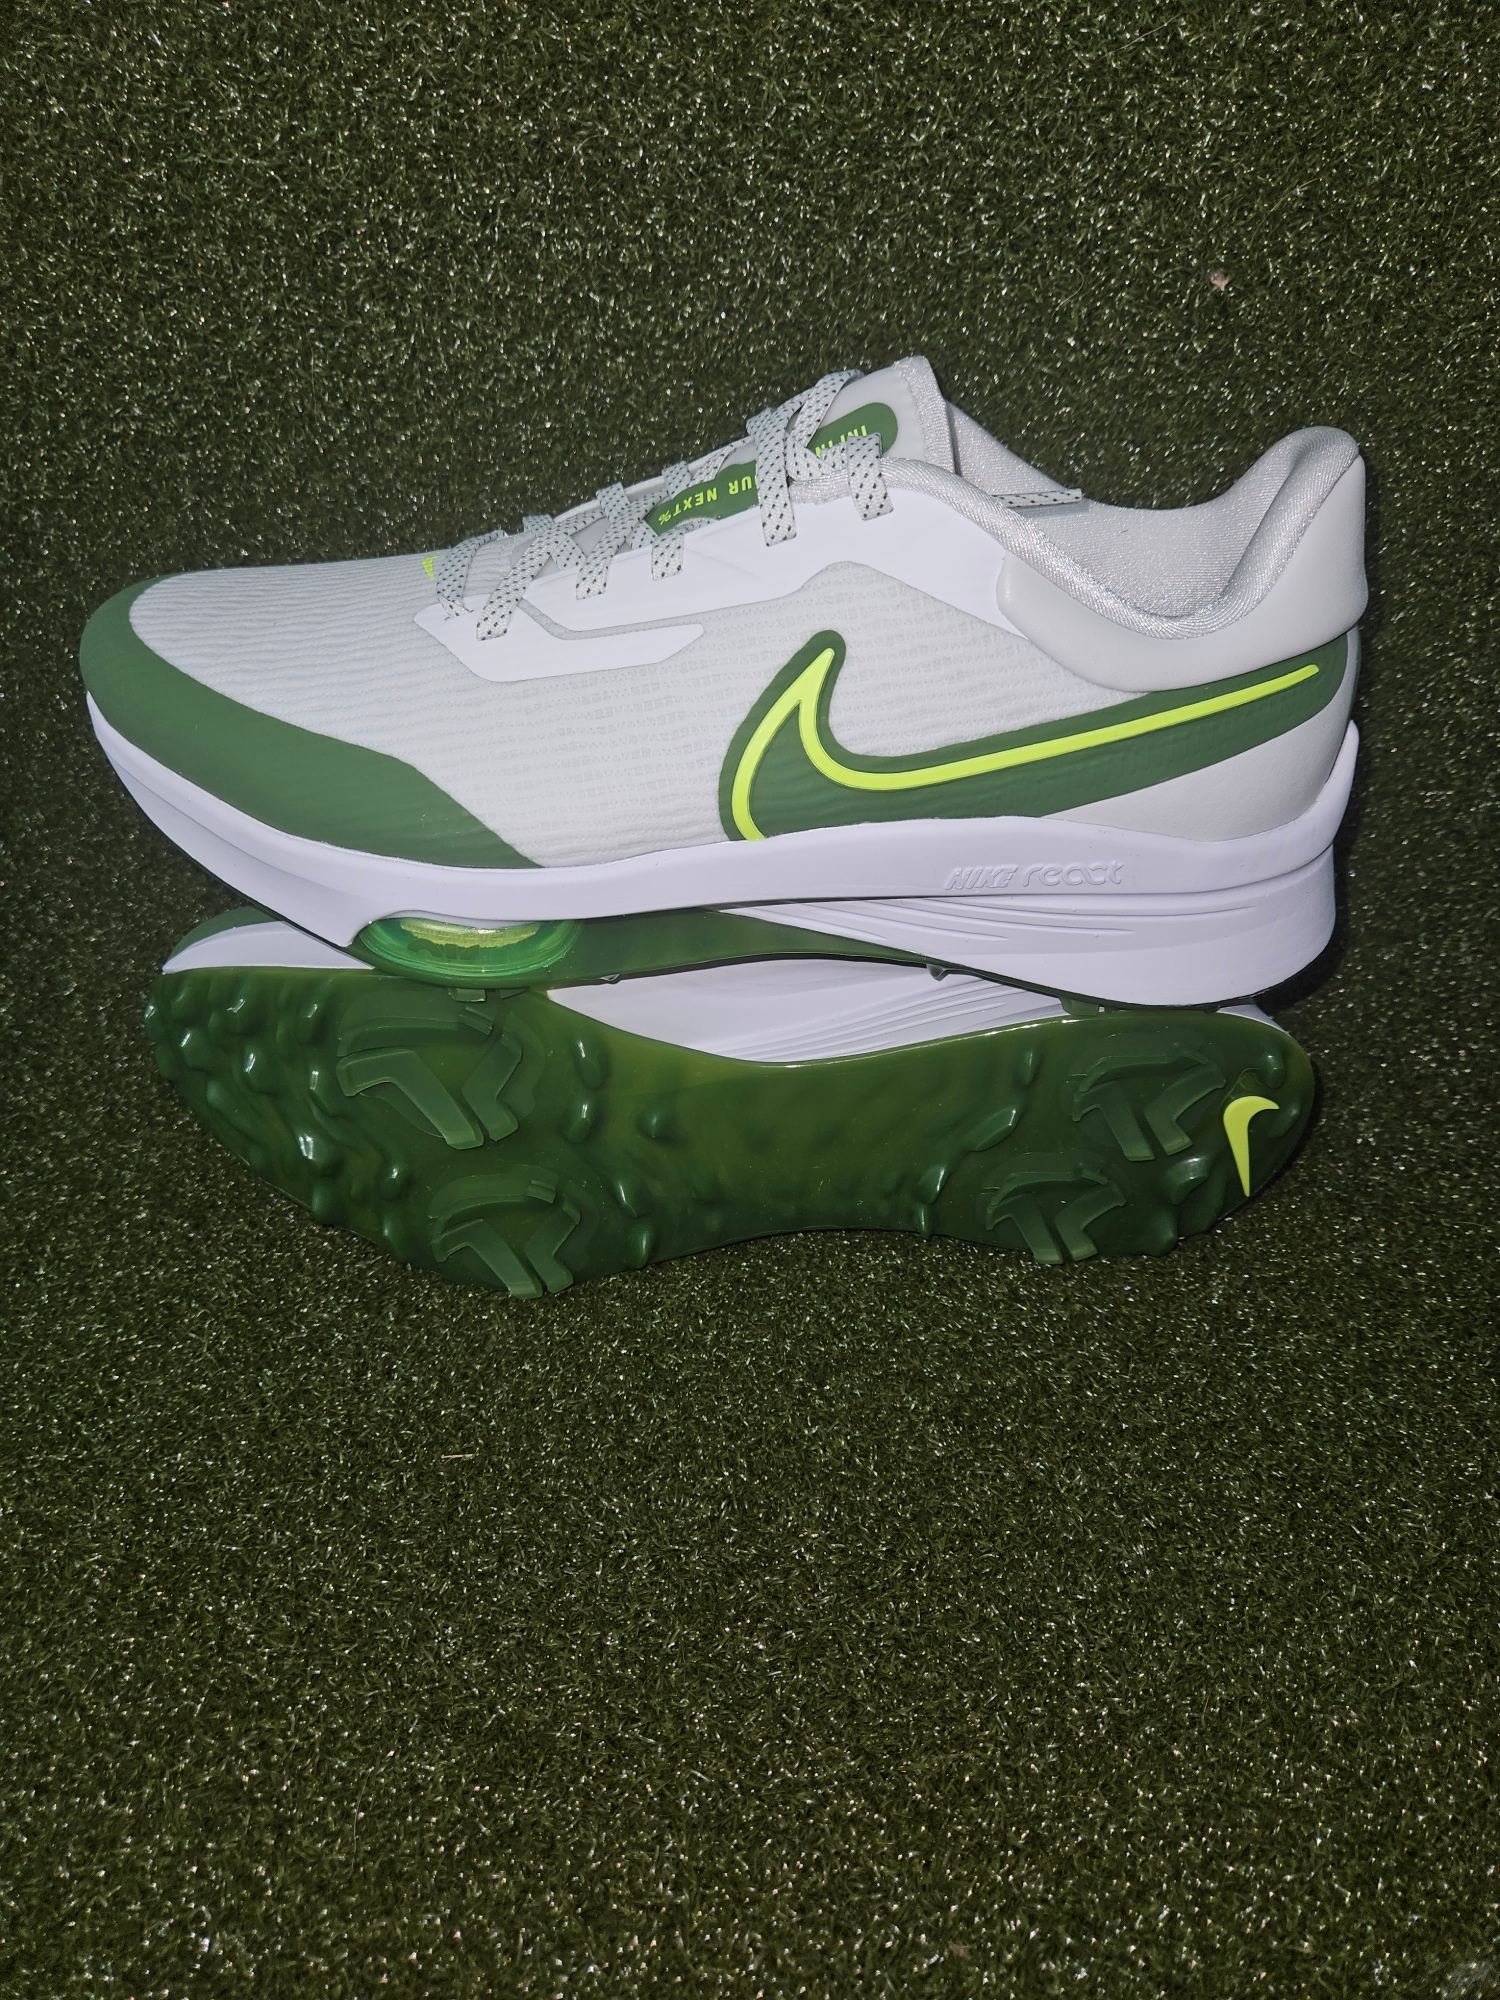 Nike air zoom infinity tour next% Golf Shoes